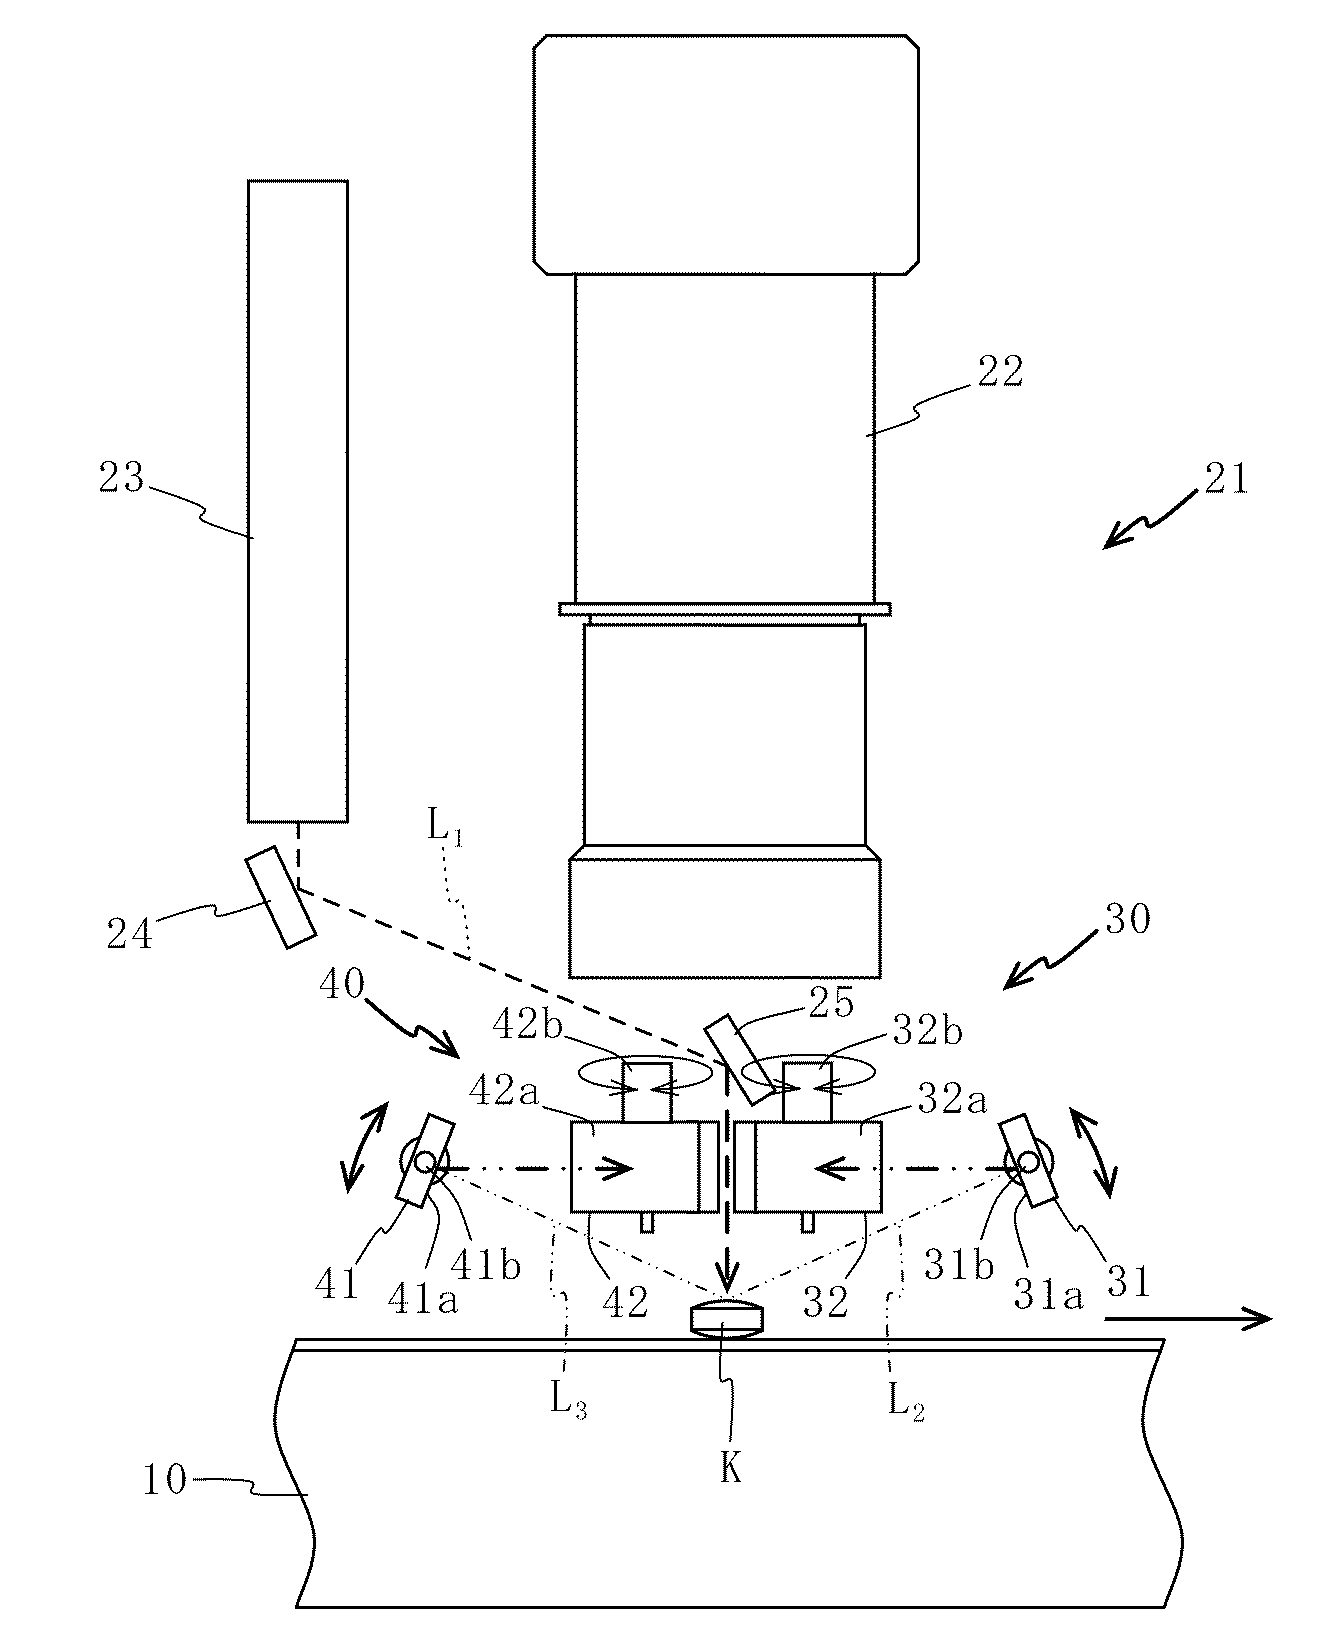 Appearance inspection apparatus